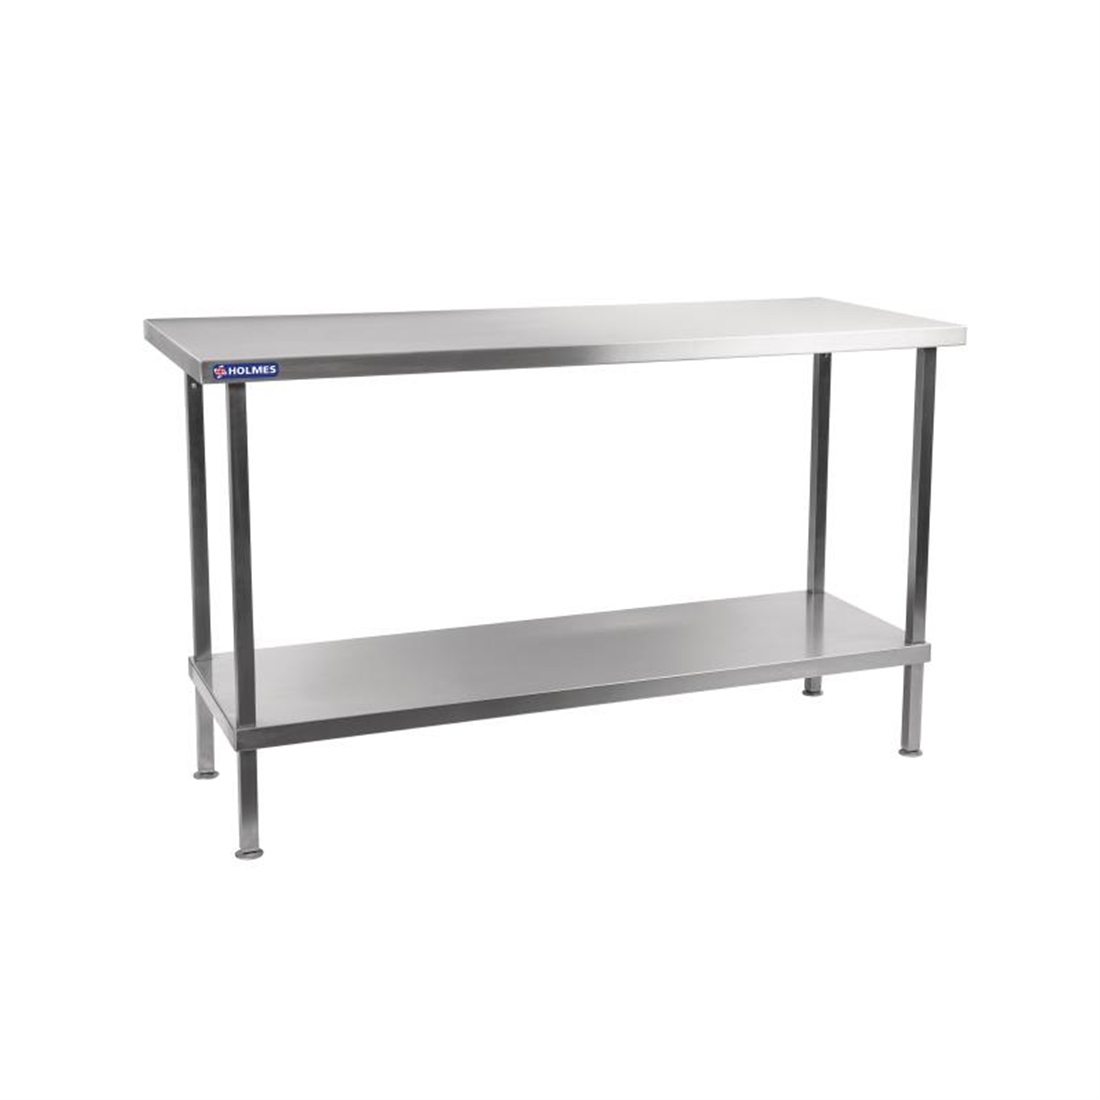 Holmes Self Assembly Stainless Steel Centre Table 1200mm